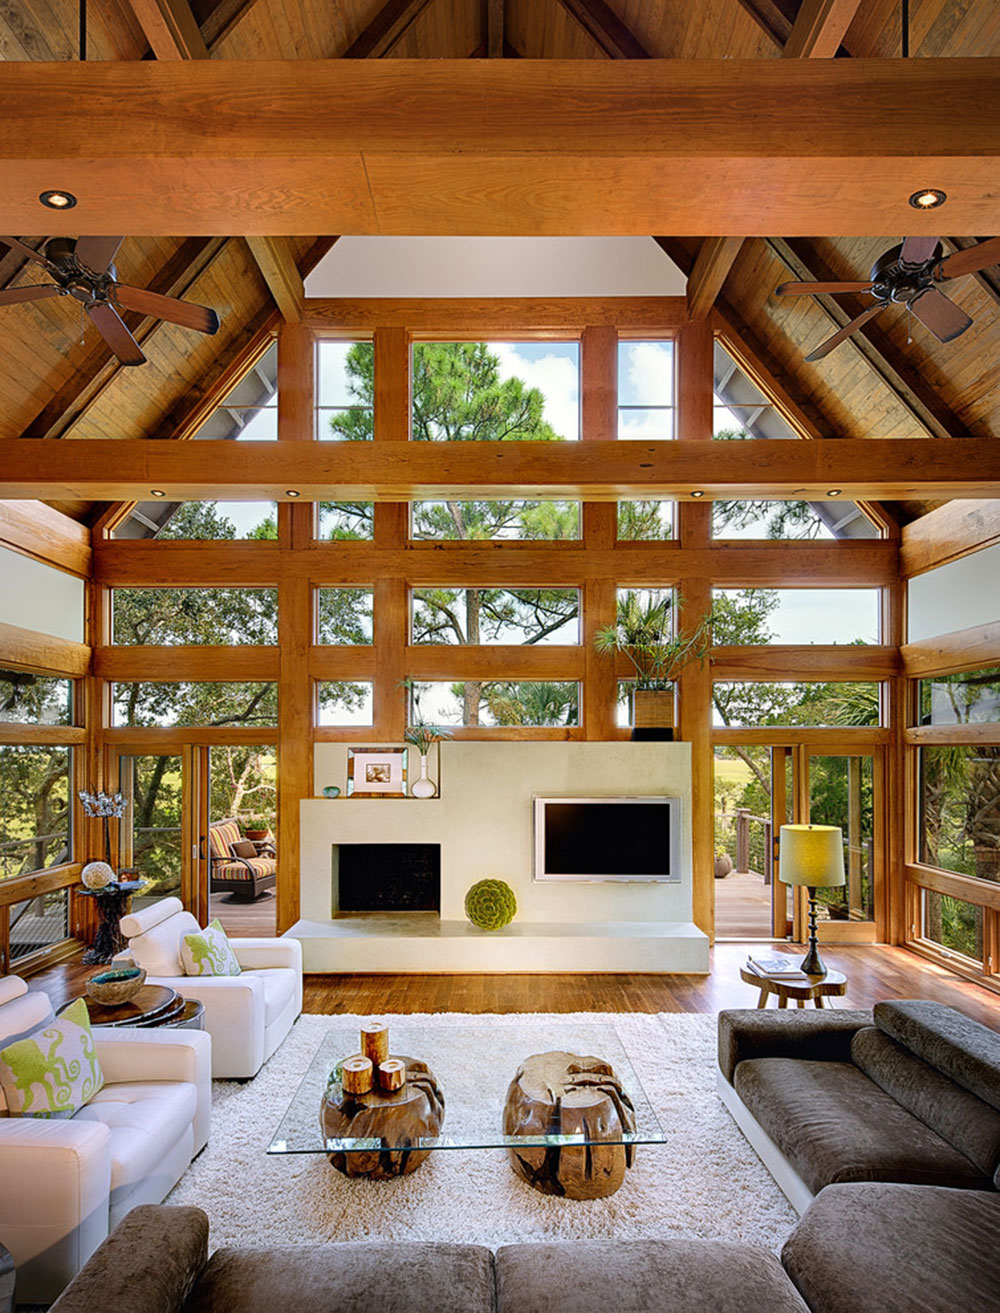 Tree-House-Kiawah-Island-by-The-Anderson-Studio-of-Architecture-Design Cool Living Room Table Ideas (34 Designs)